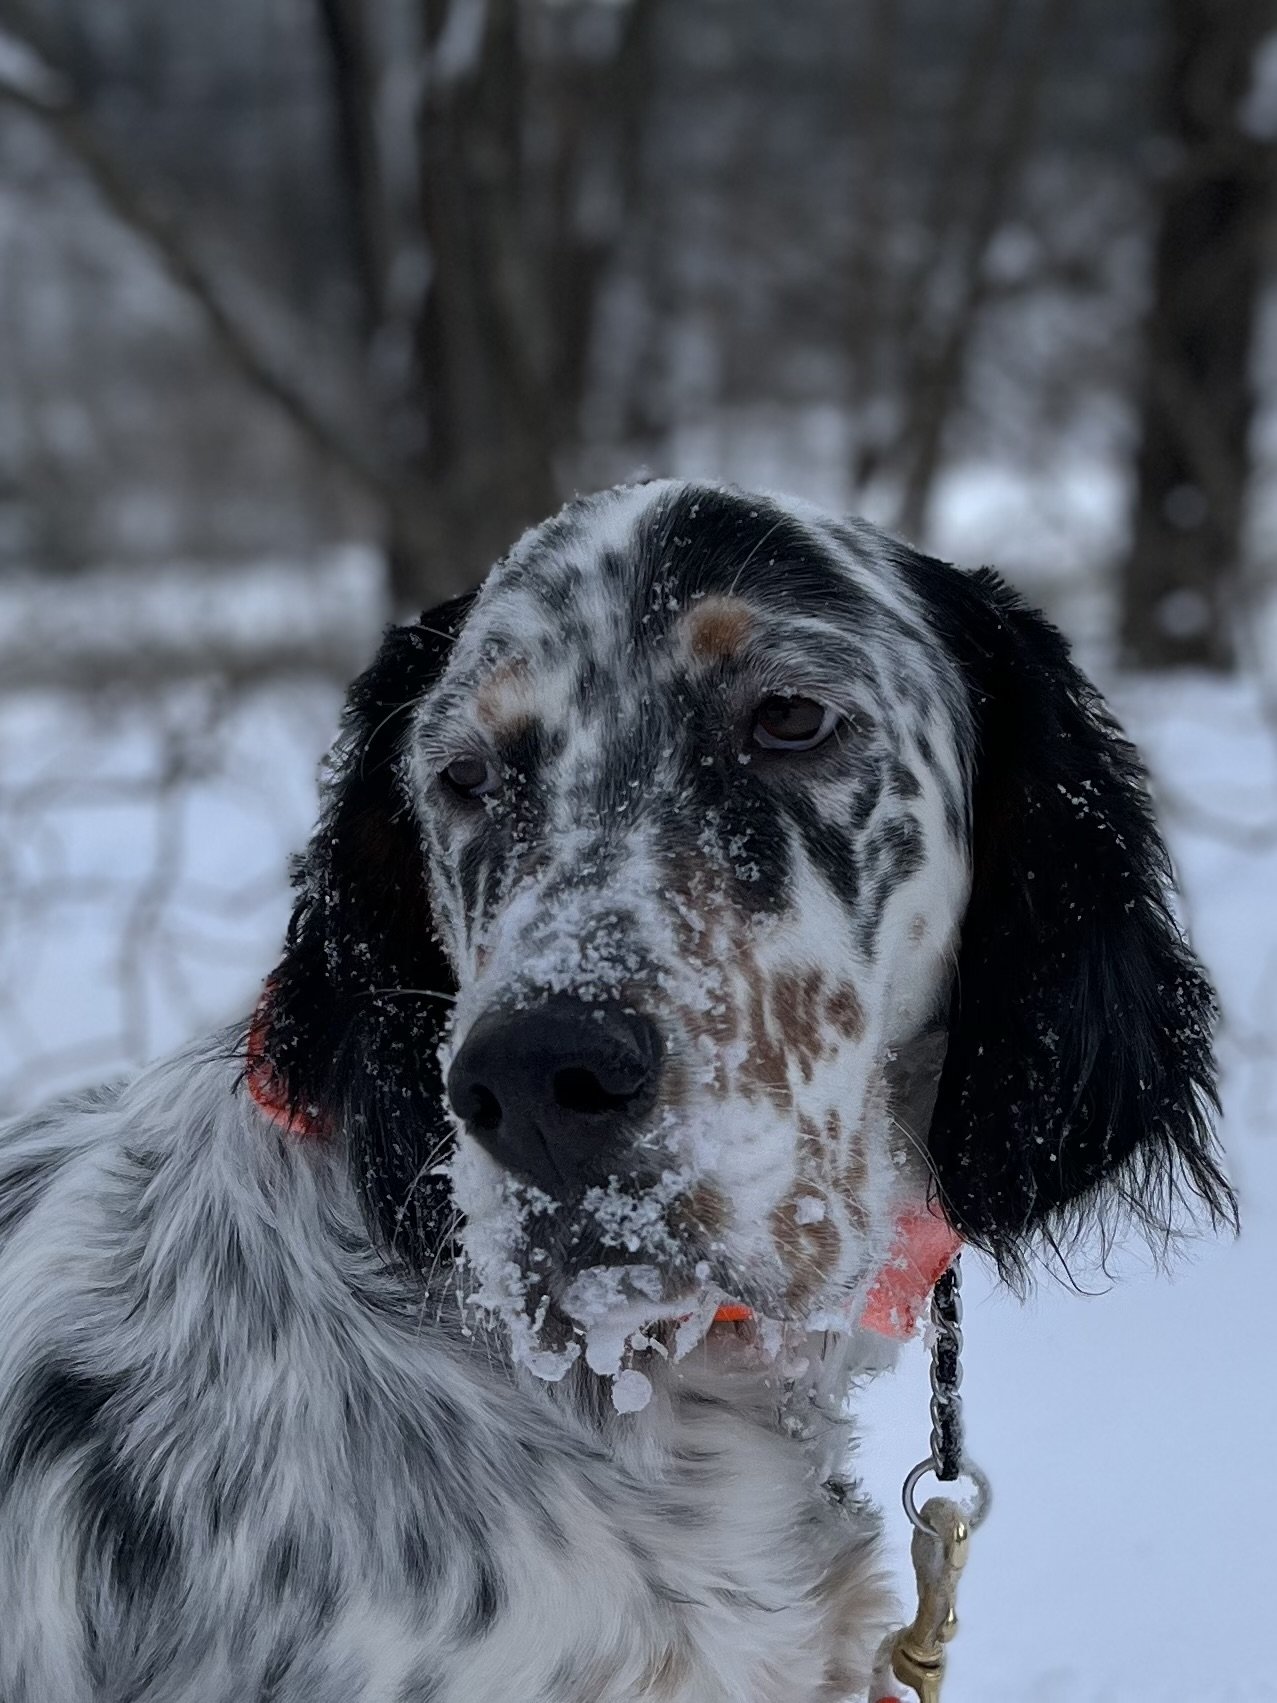   Sonny of Moretown after a snowy romp, closeup. Photo by Cary Friberg  